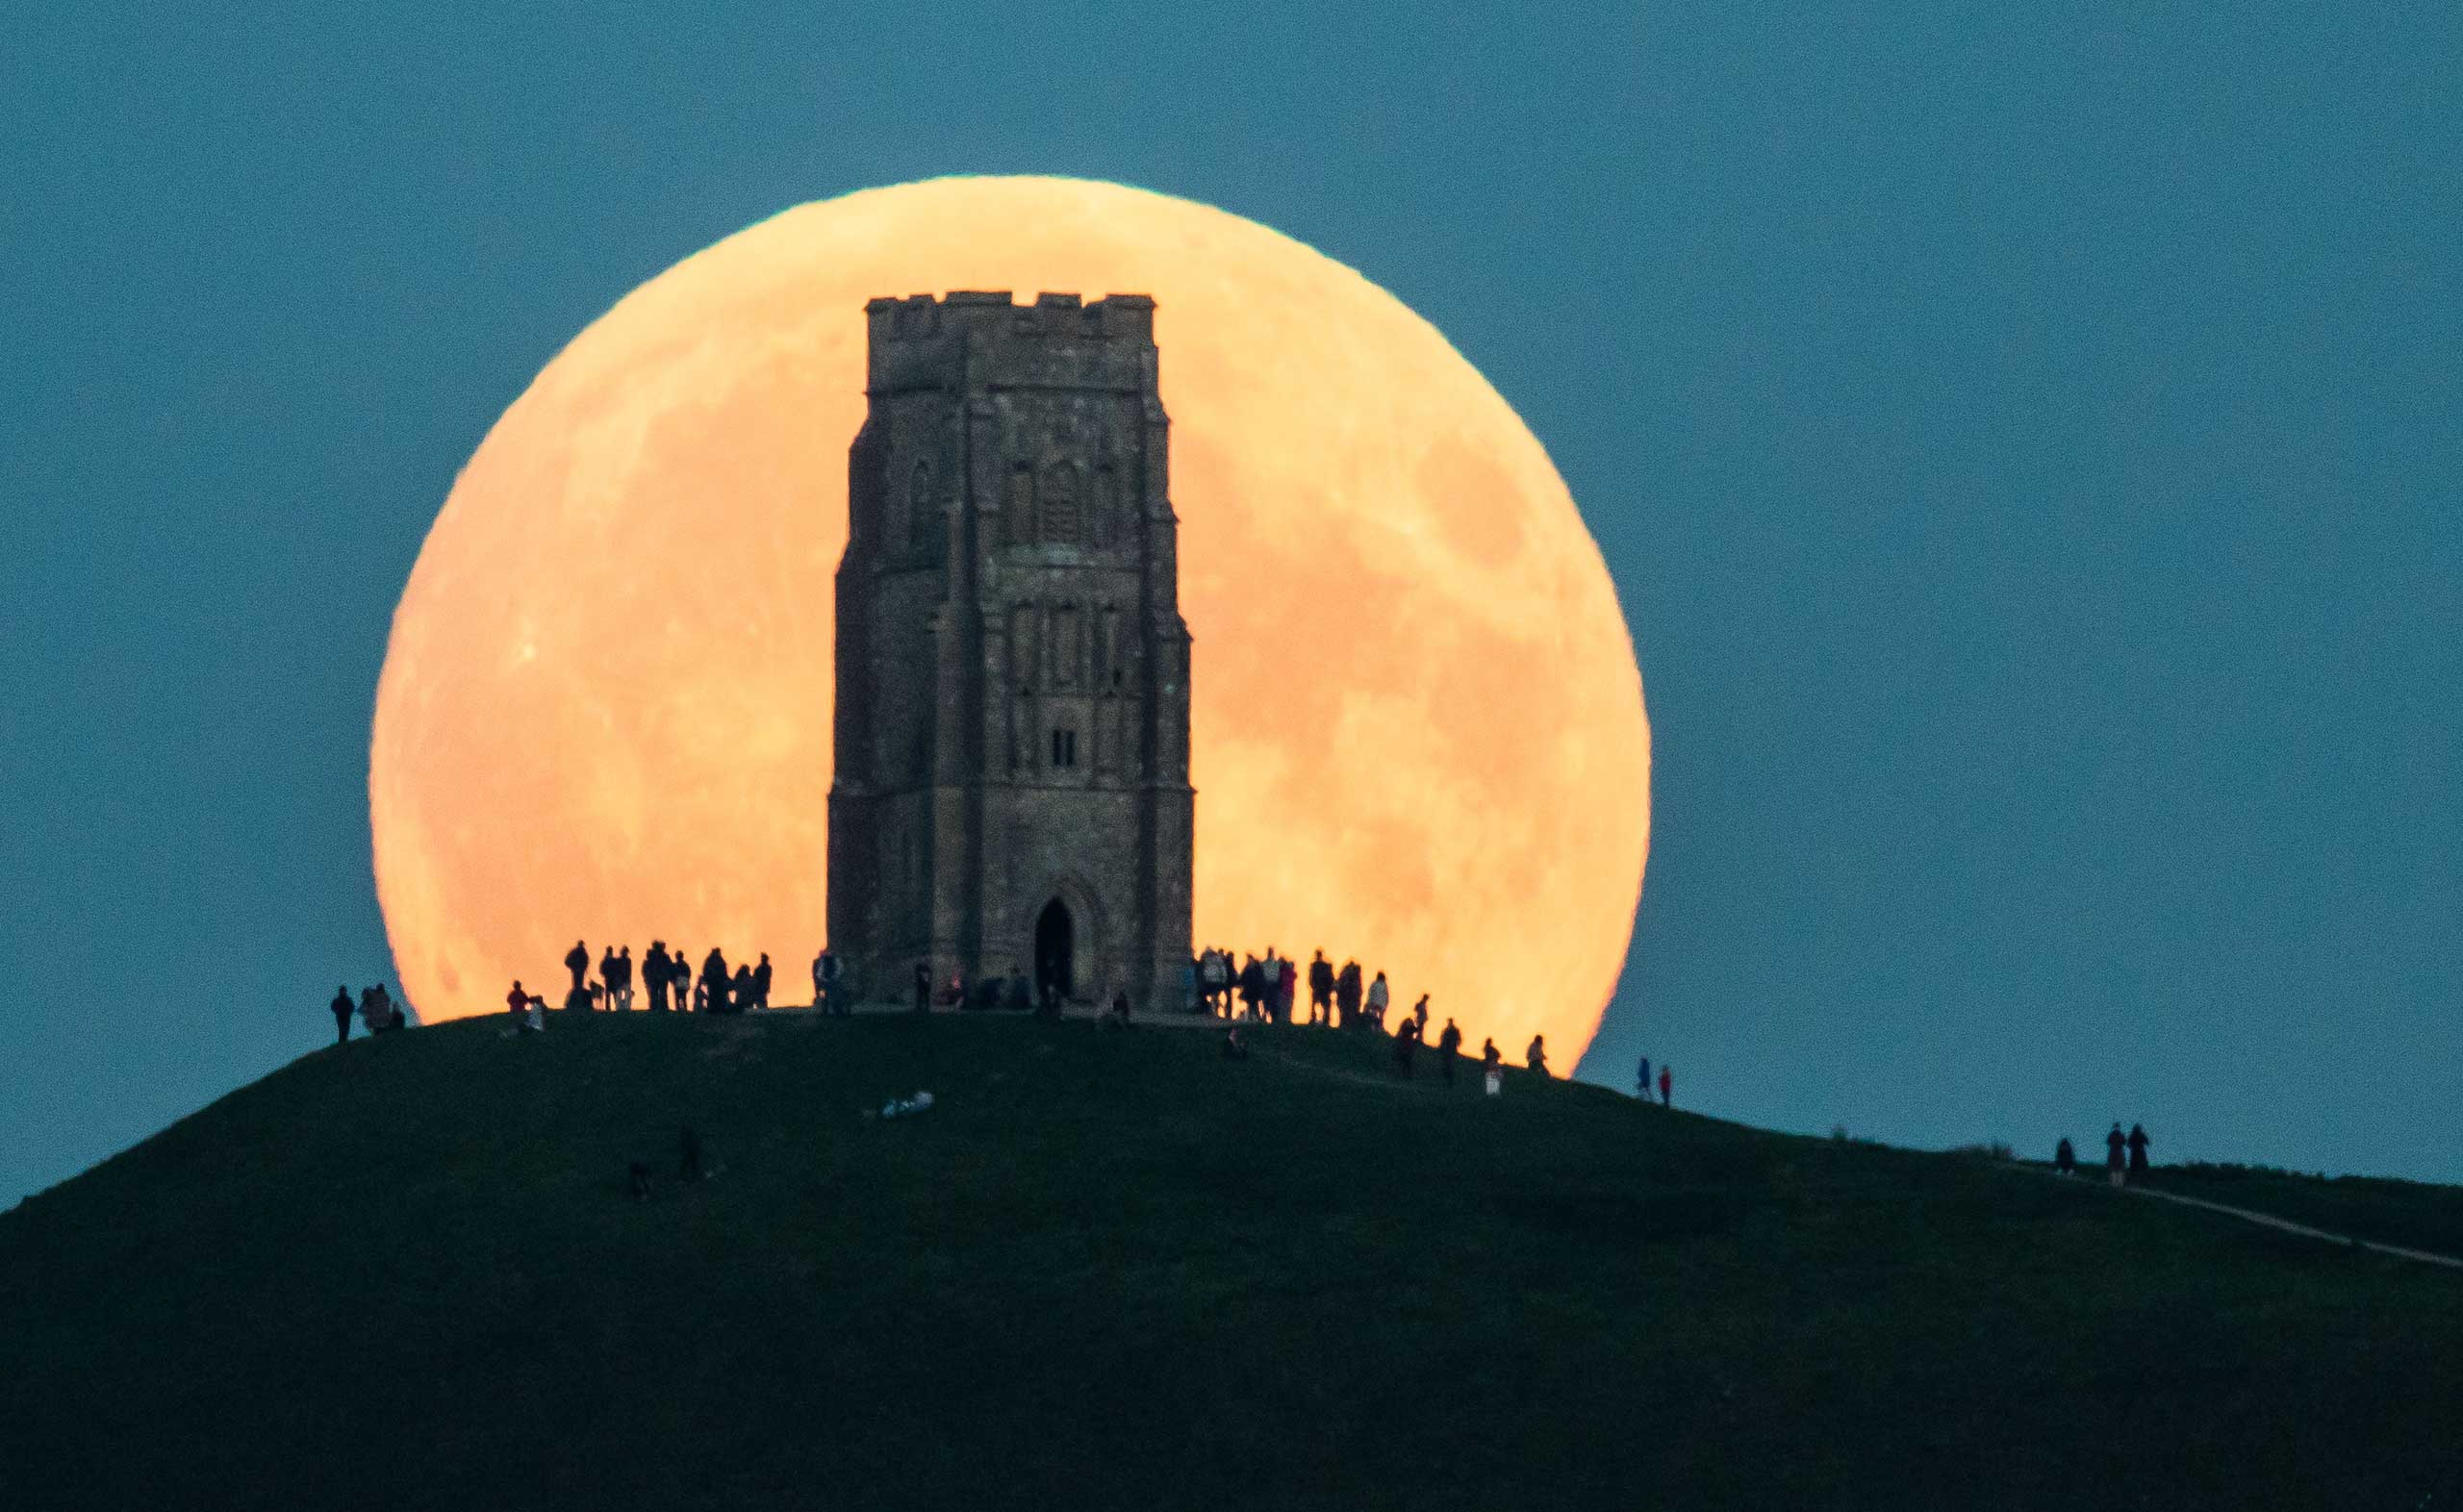 The supermoon rises behind Glastonbury Tor in Glastonbury, England, on Sept. 27, 2015 (Matt Cardy—Getty Images)